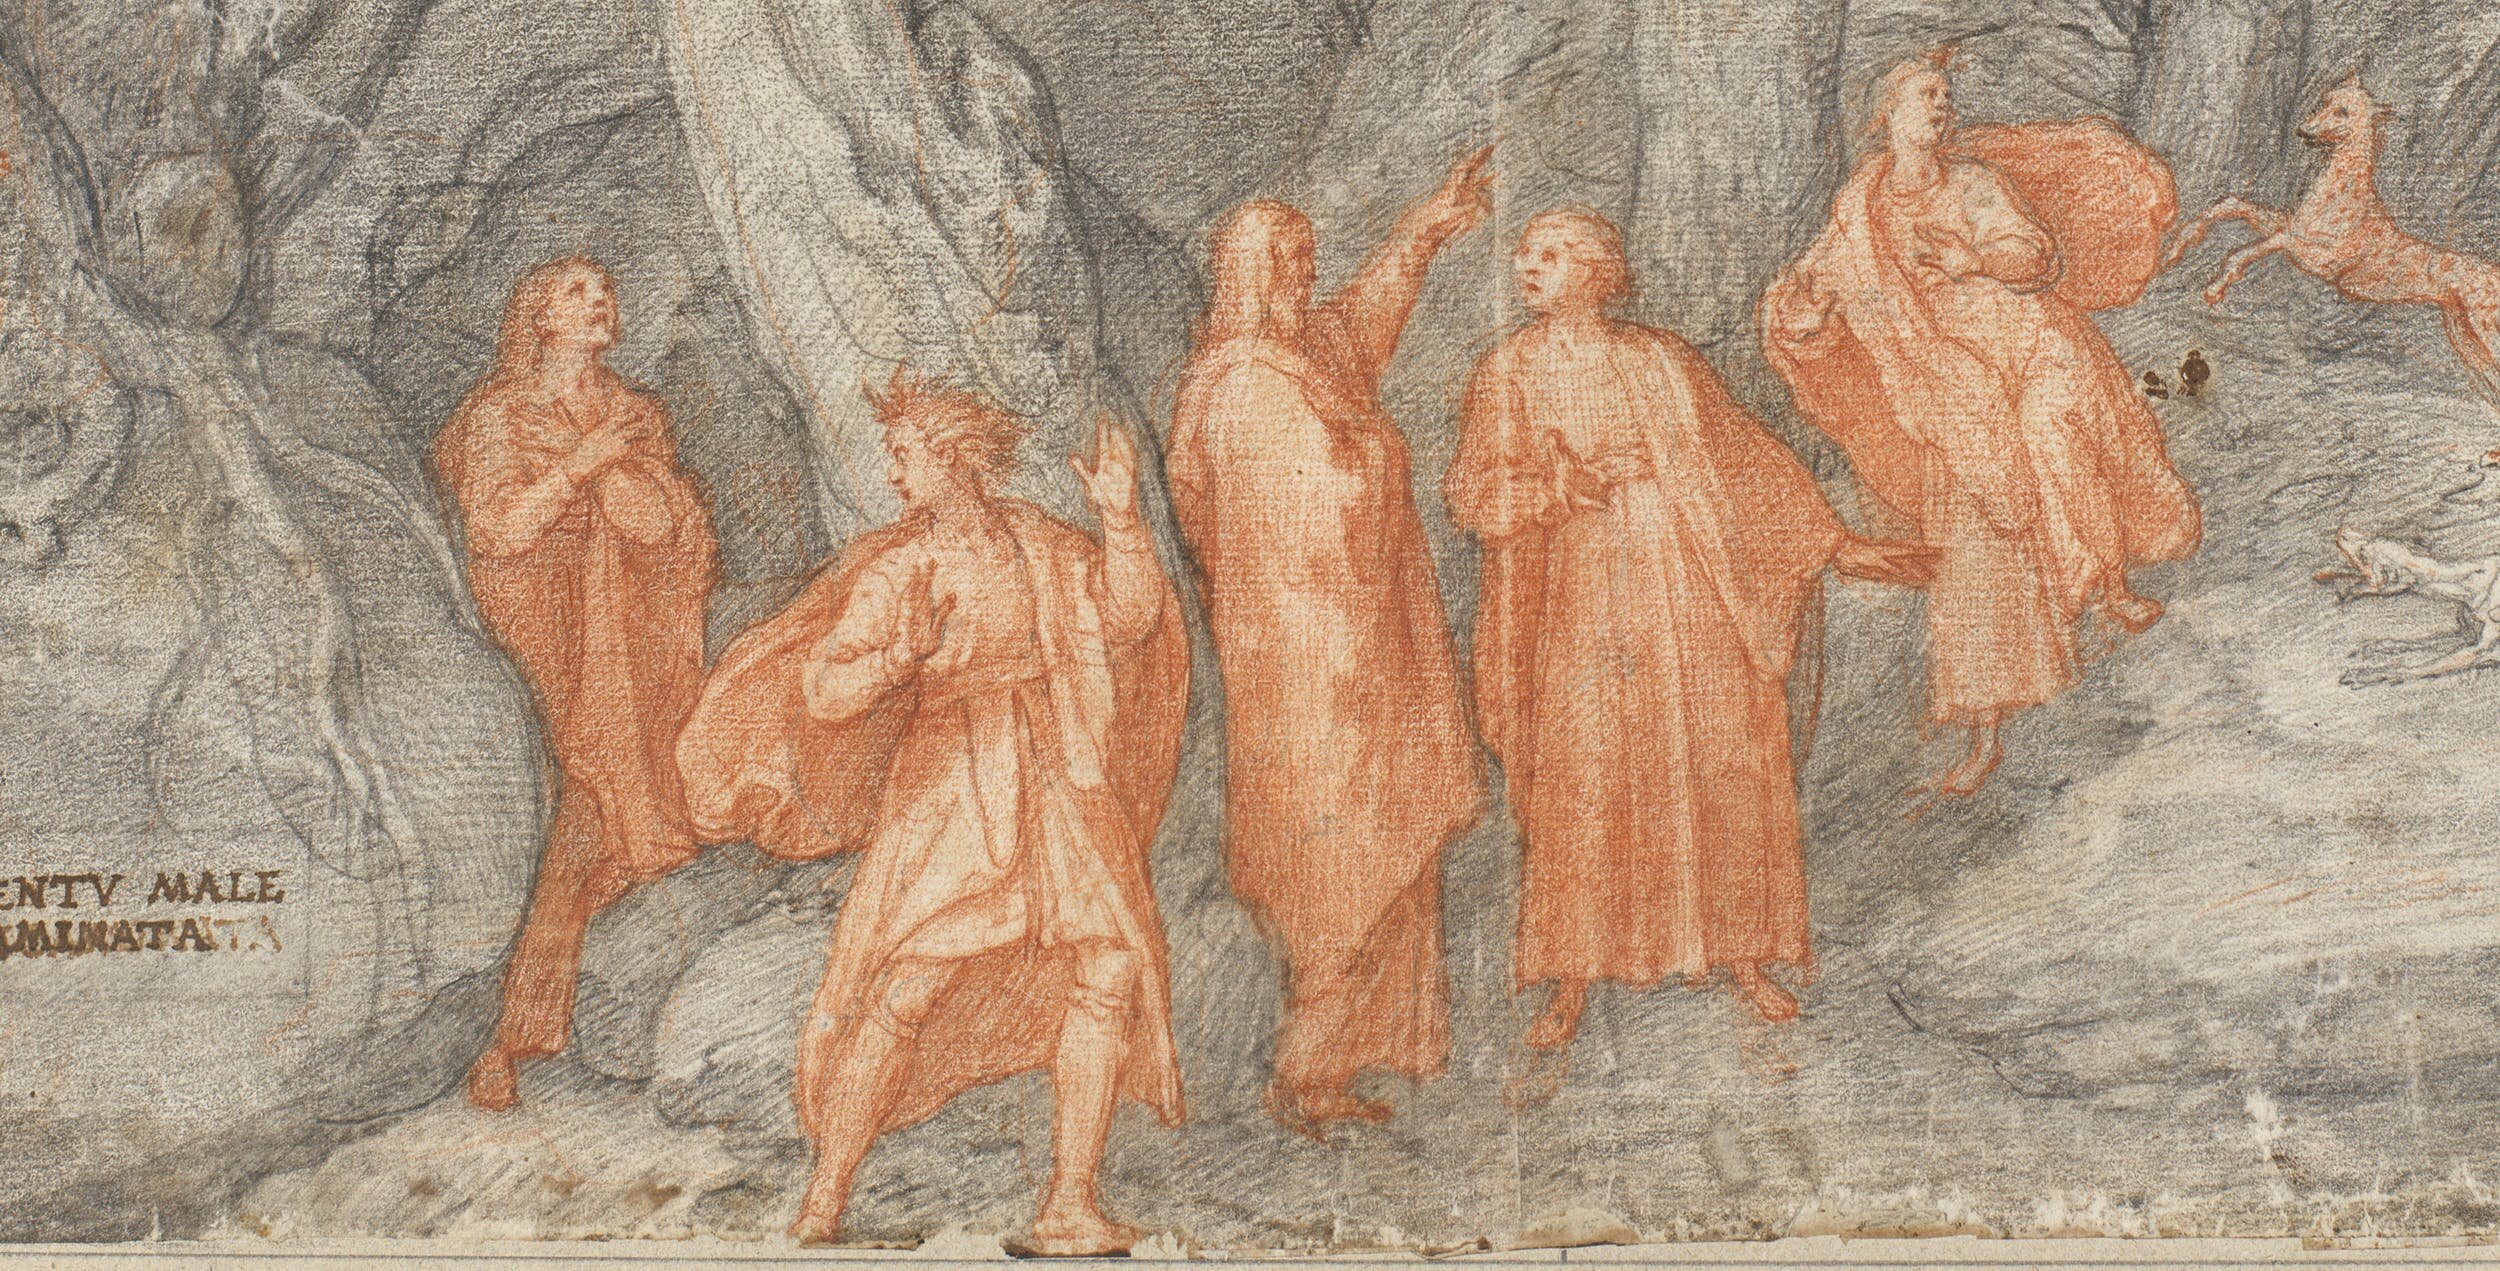 Artistic Influence of Dante's The Divine Comedy Explored in Exhibition at  National Gallery of Art